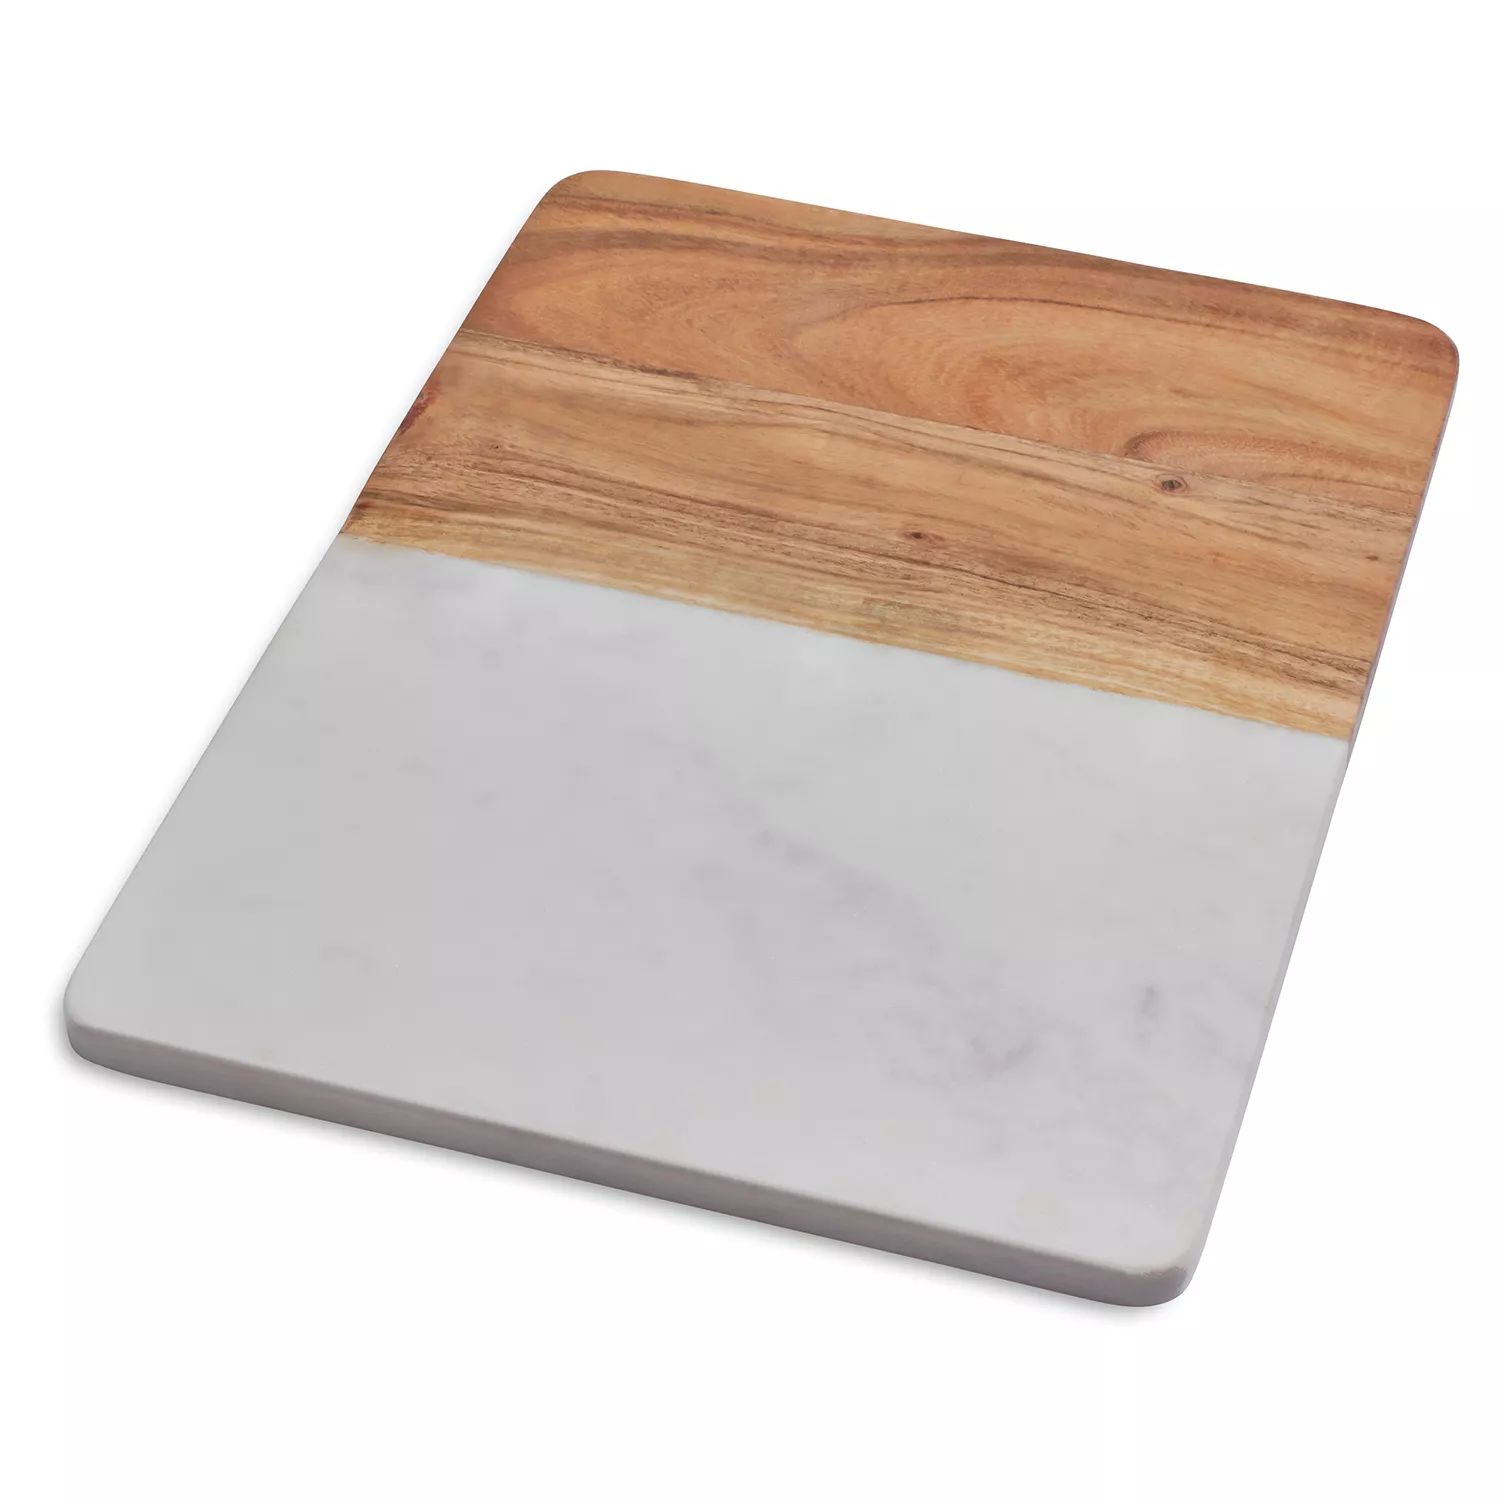 Sur La Table Marble and Mango Wood Cheese Board